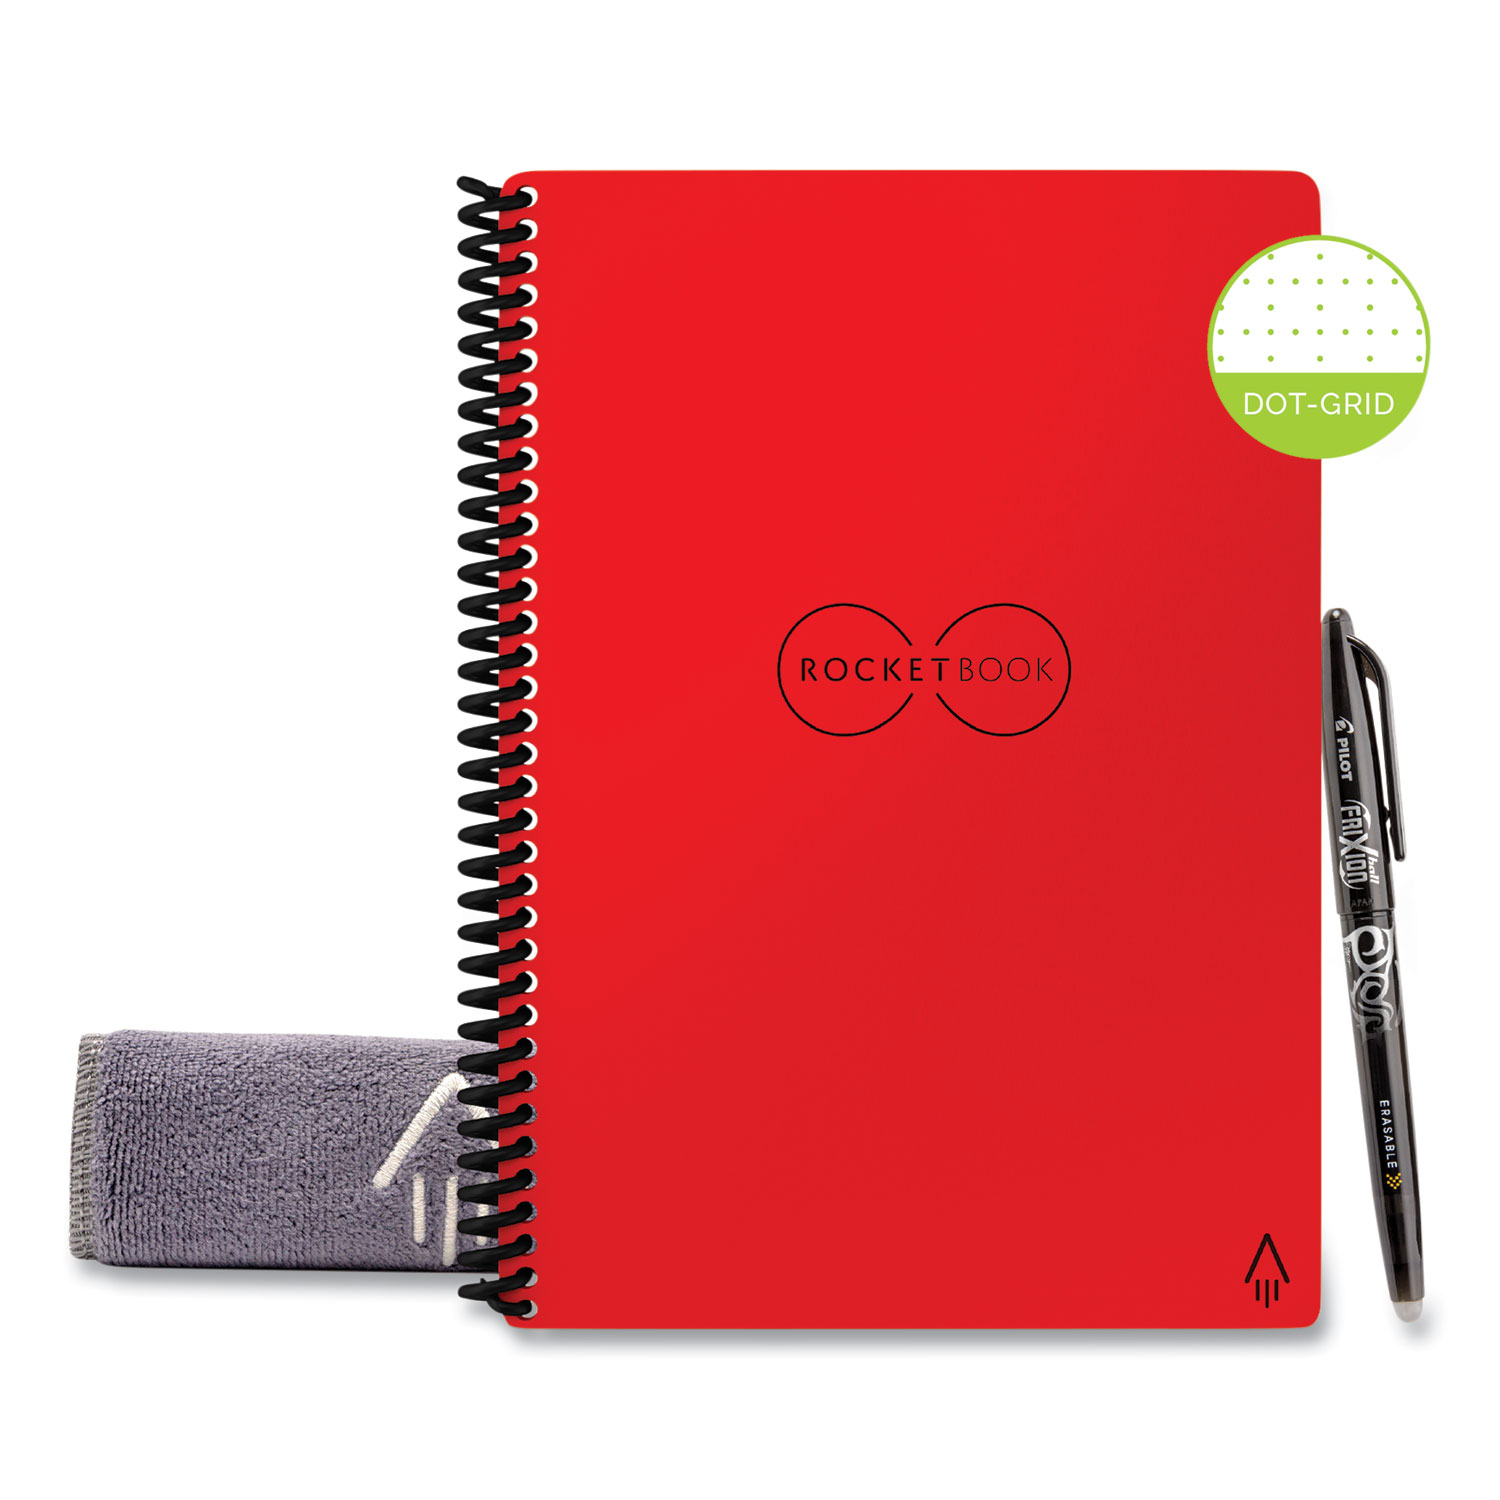  Rocketbook EVR-E-R-CBG Rocketbook Everlast Smart Reusable Notebook, Dotted Rule, Atomic Red Cover, 6 x 8.8, 18 Sheets (RKB24328144) 